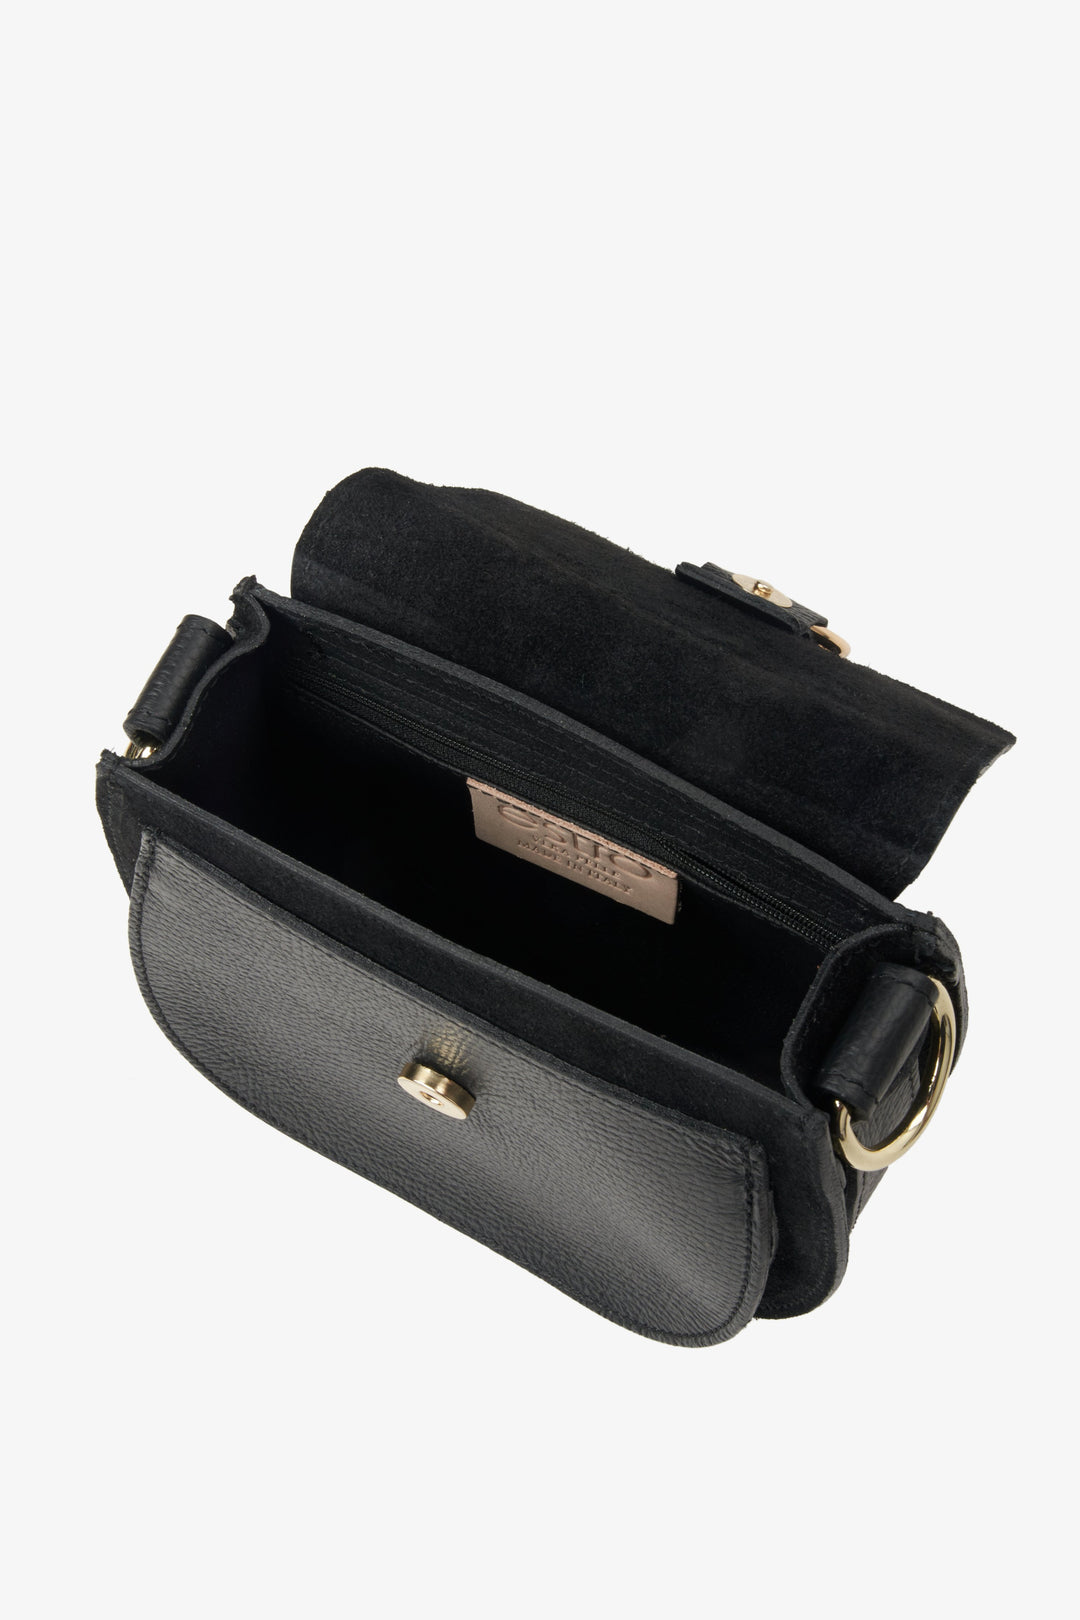 Women's black shoulder bag by Estro handmade in Italy - close up on the lining.